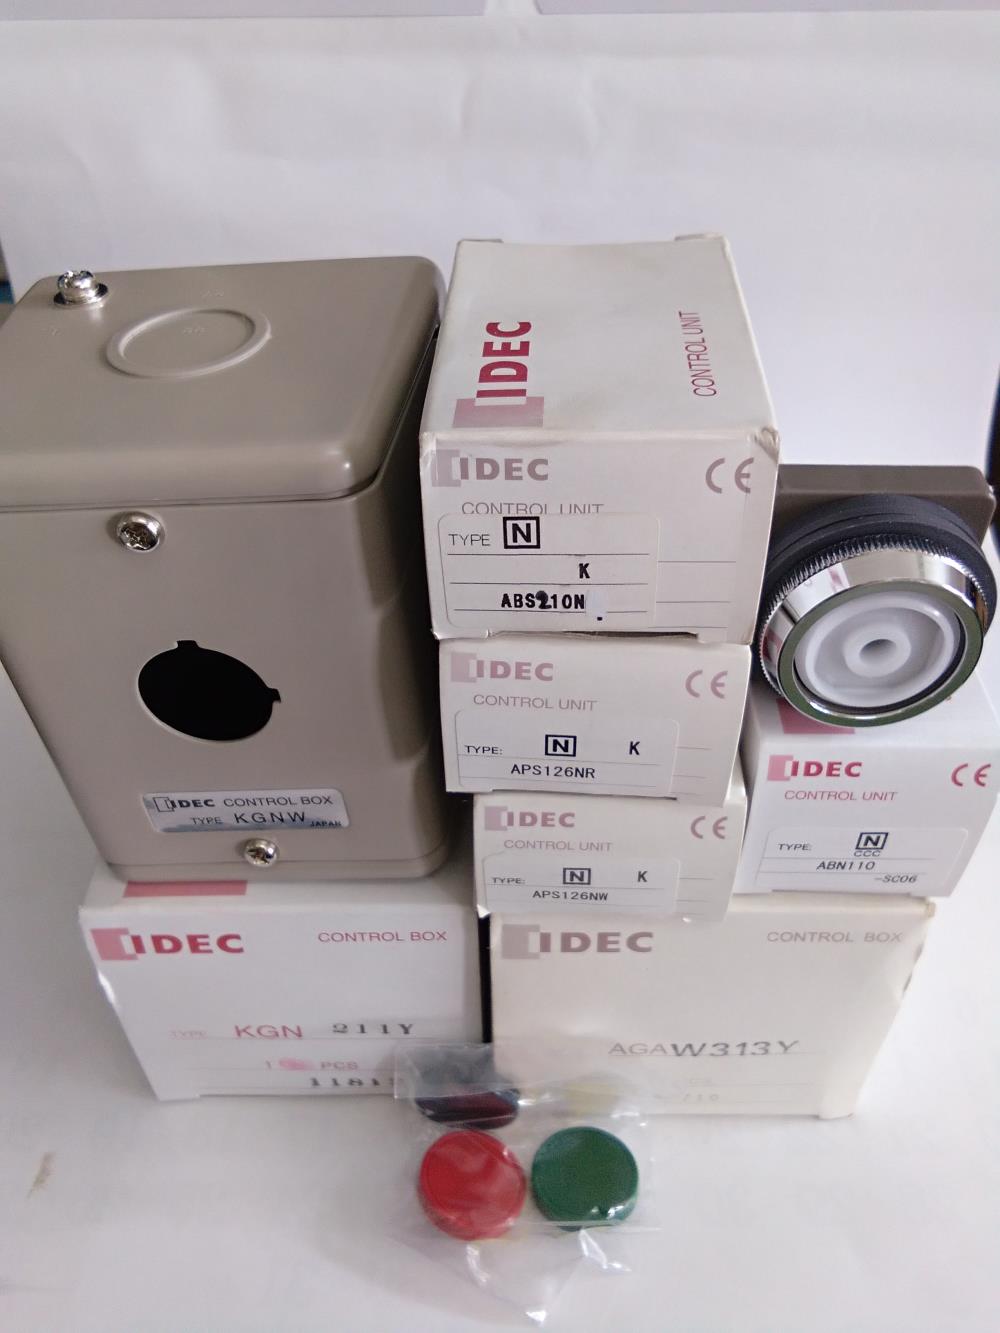 IDEC : Push button switch / control box / pilot lamp / selector switch,IDEC , push button switch , control box station , pilot lamp , selector switch , control box,IDEC,Instruments and Controls/Switches